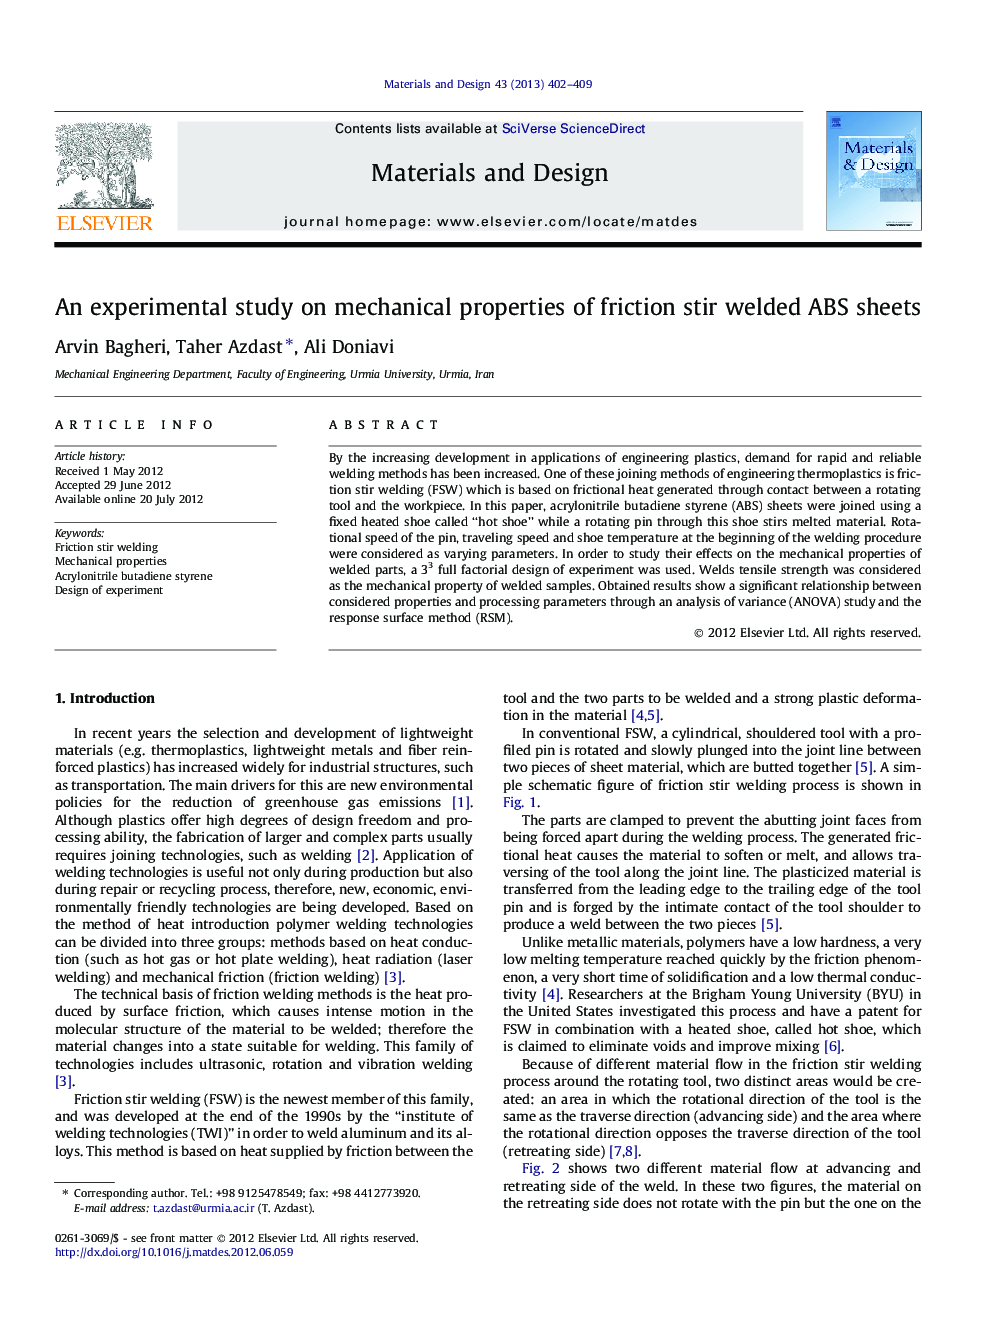 An experimental study on mechanical properties of friction stir welded ABS sheets